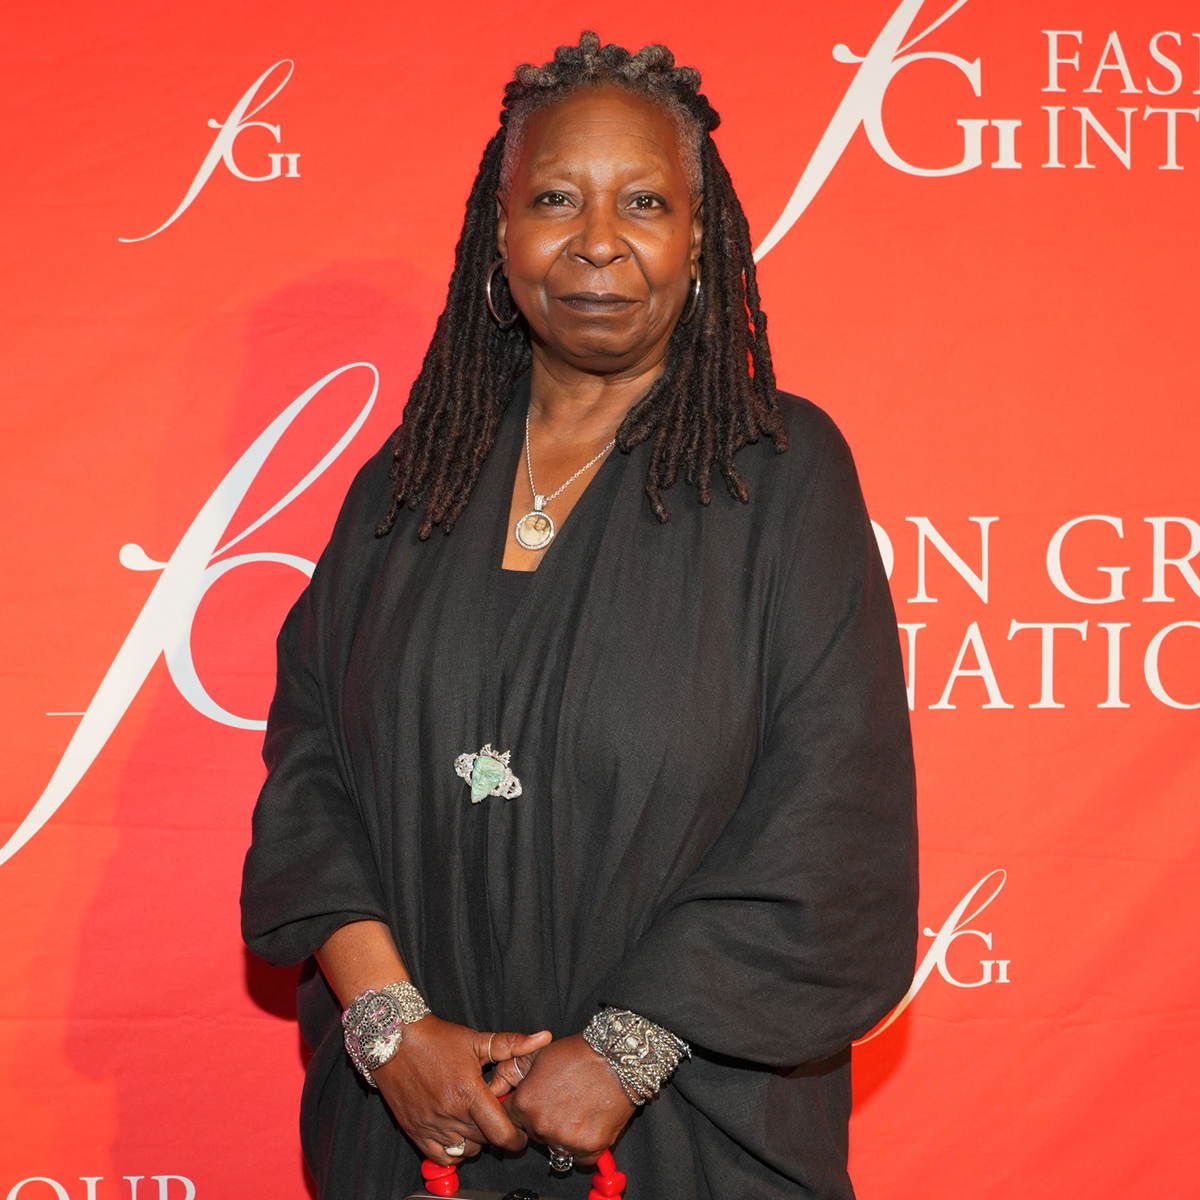 Whoopi Goldberg Reveals She Lost Weight of 2 People Due to Mounjaro